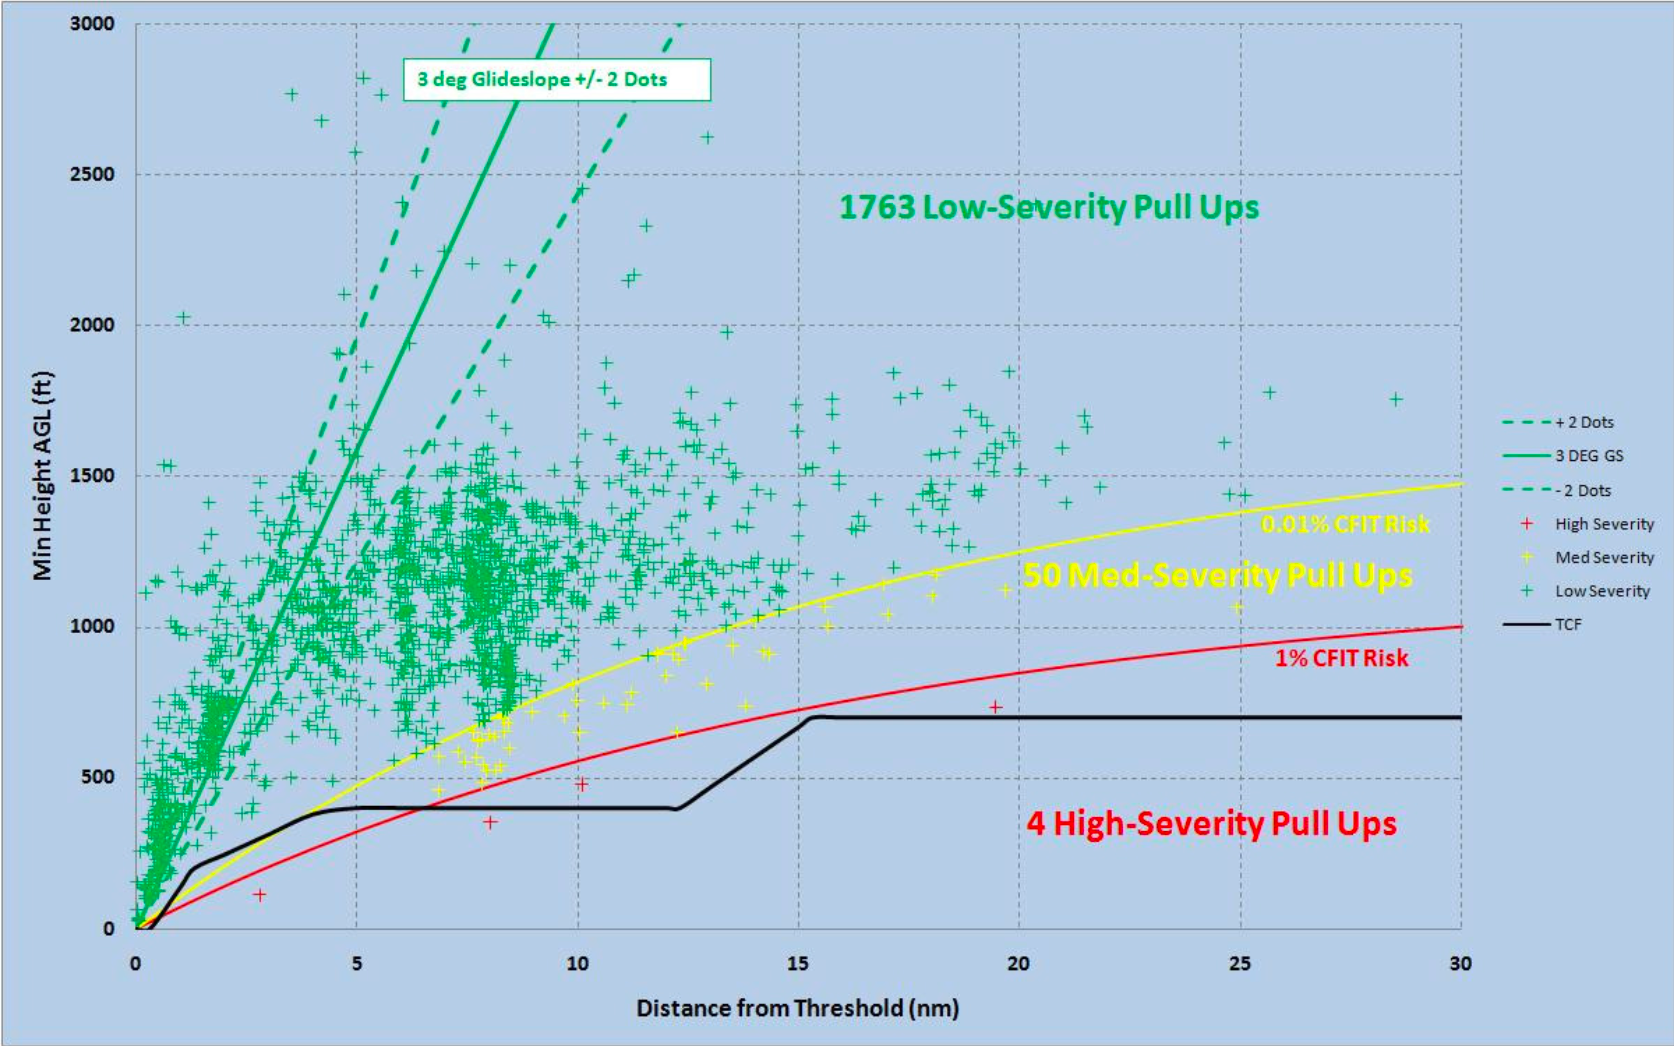 Scatter plot of EGPWS pull-ups by height AGL and distance from runway